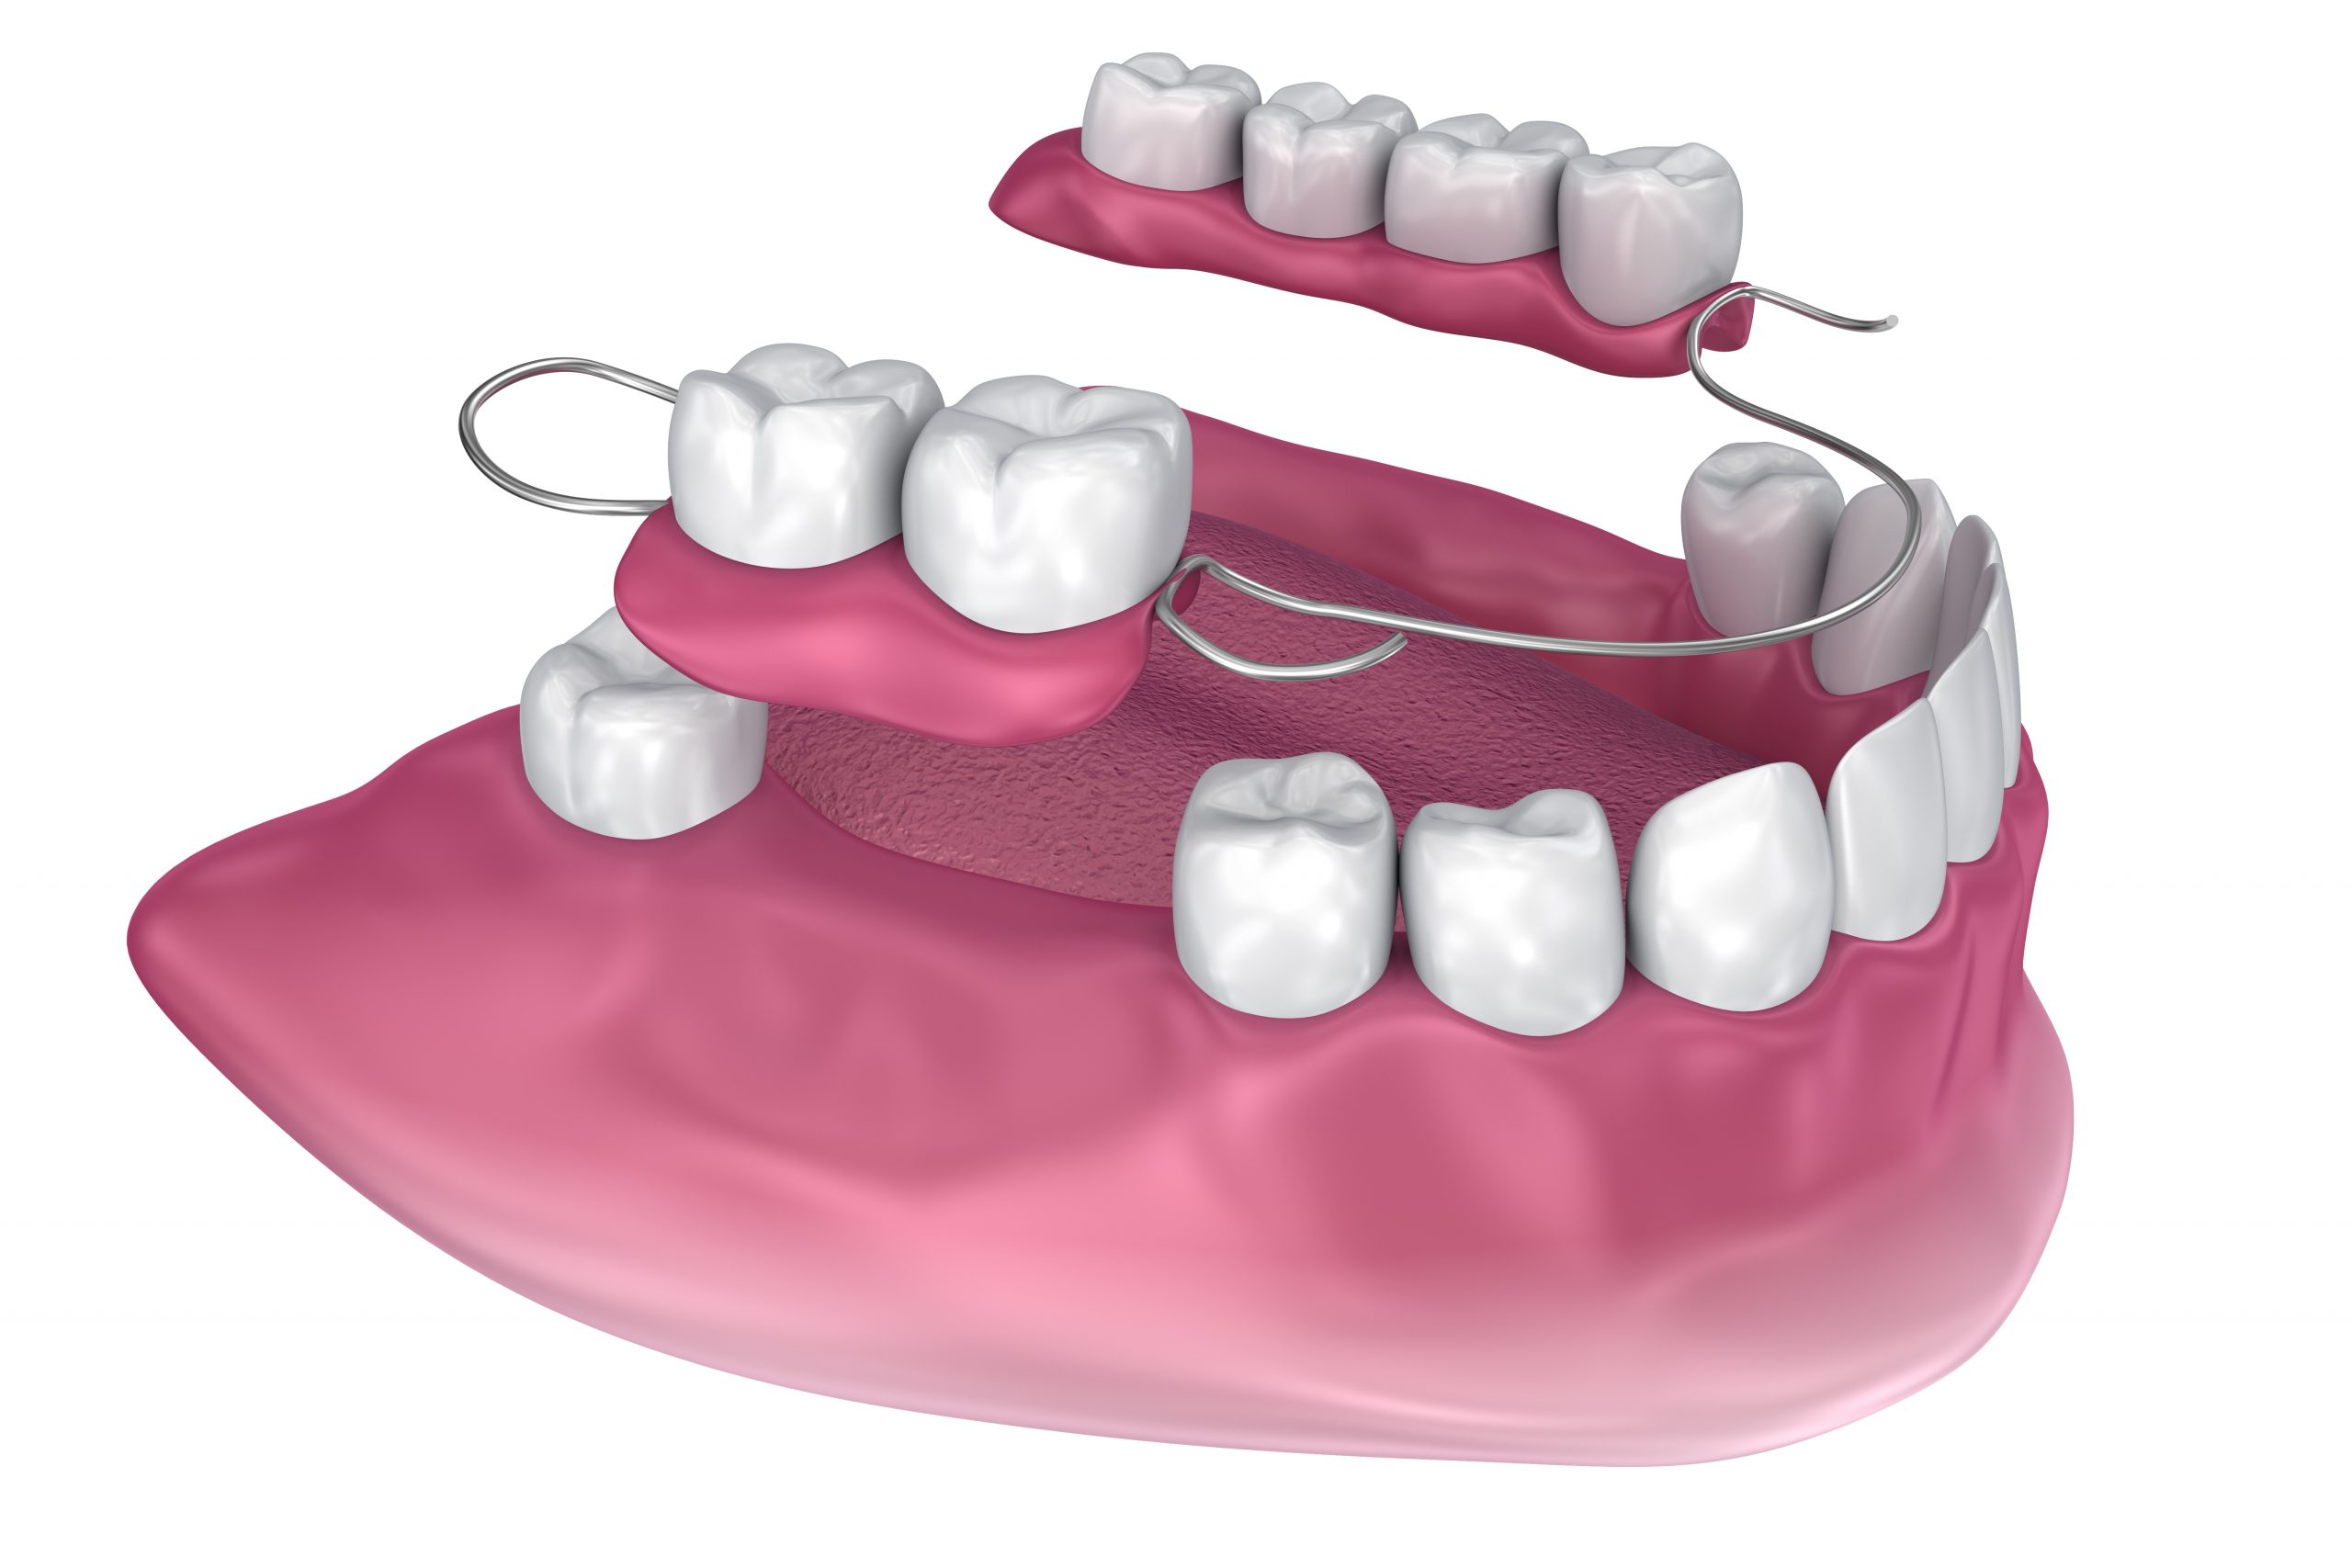 Removable partial denture. Medically accurate 3D illustration